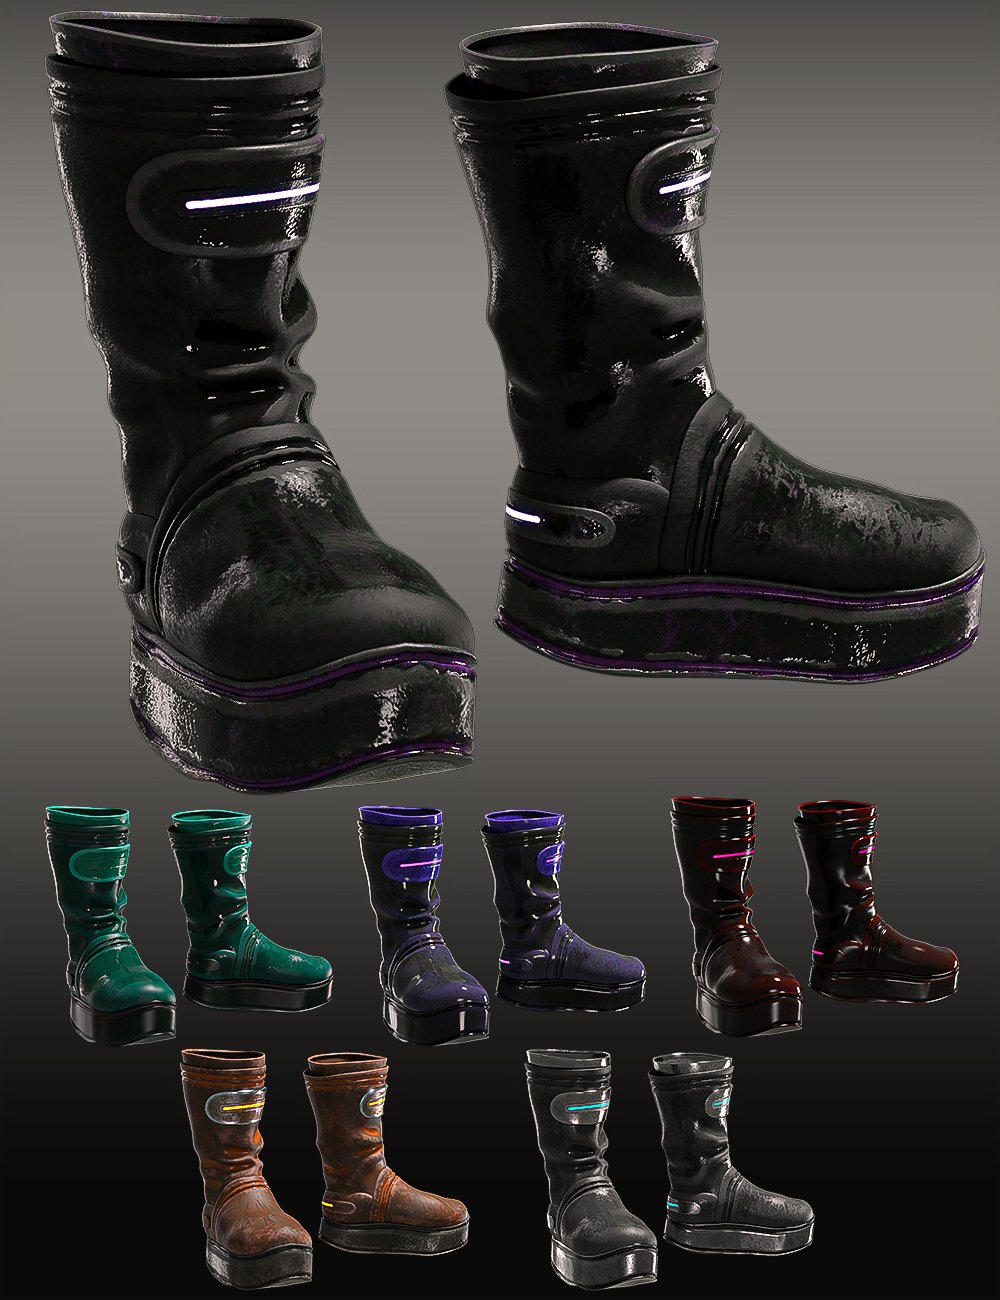 Sci-fi Rebel Rider Outfit Boots and Gloves for Genesis 8.1 Female